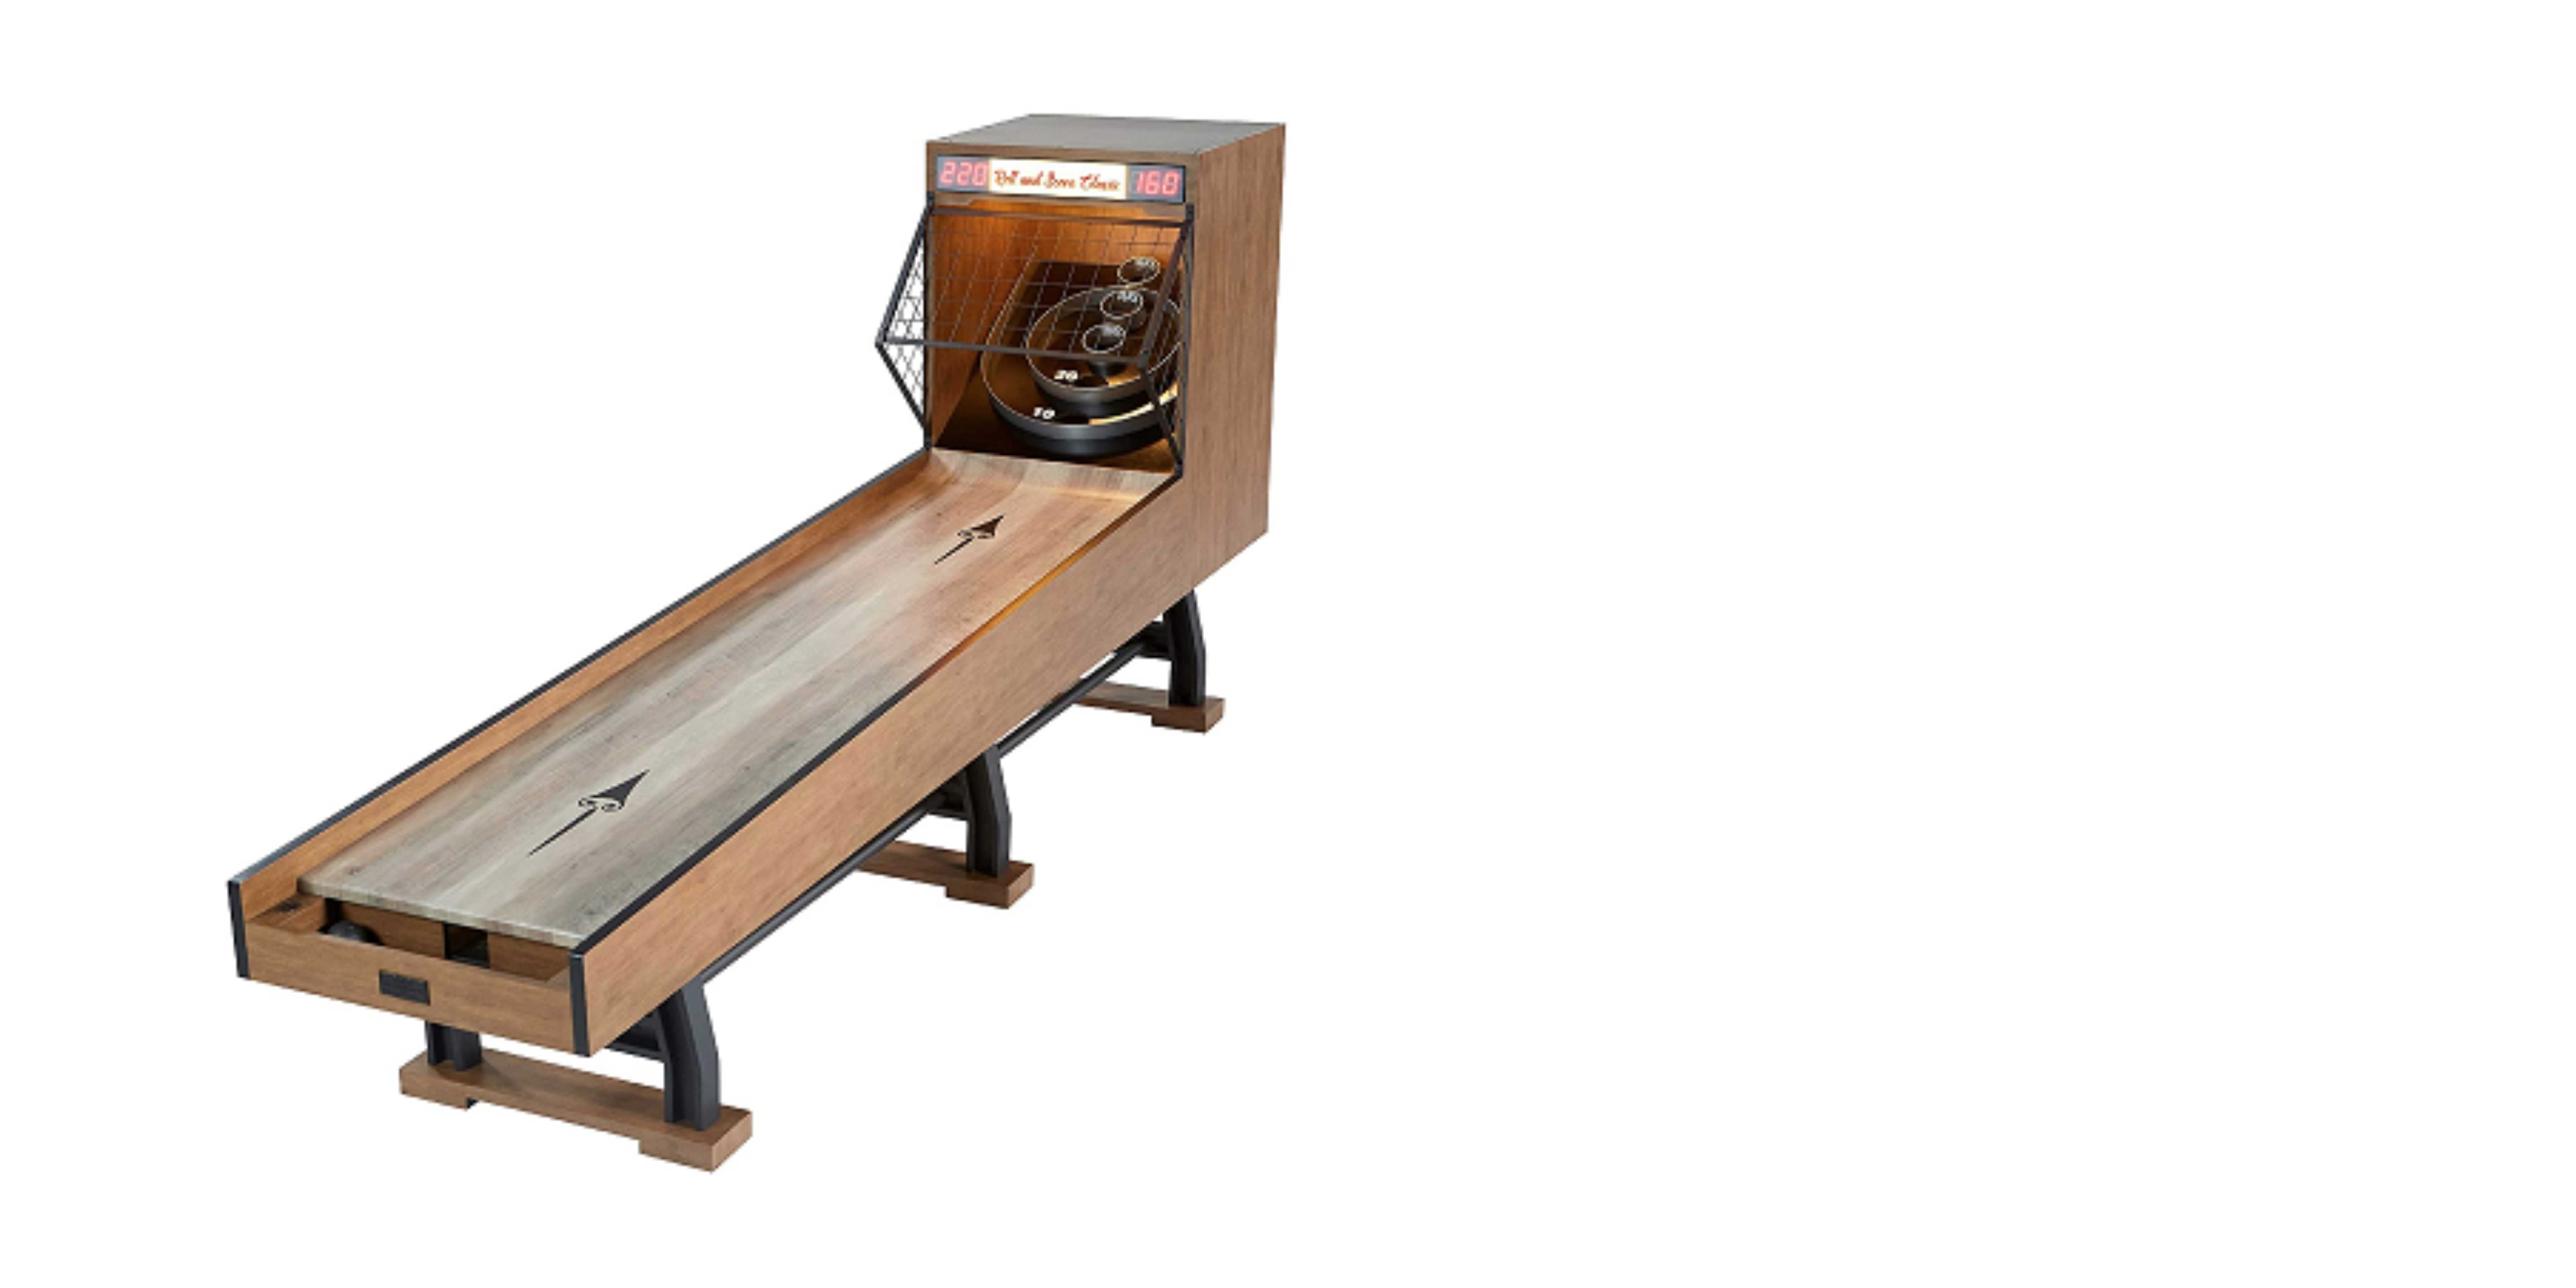 Skee ball machine with a rustic appearance, with oak lamination and metal detailing